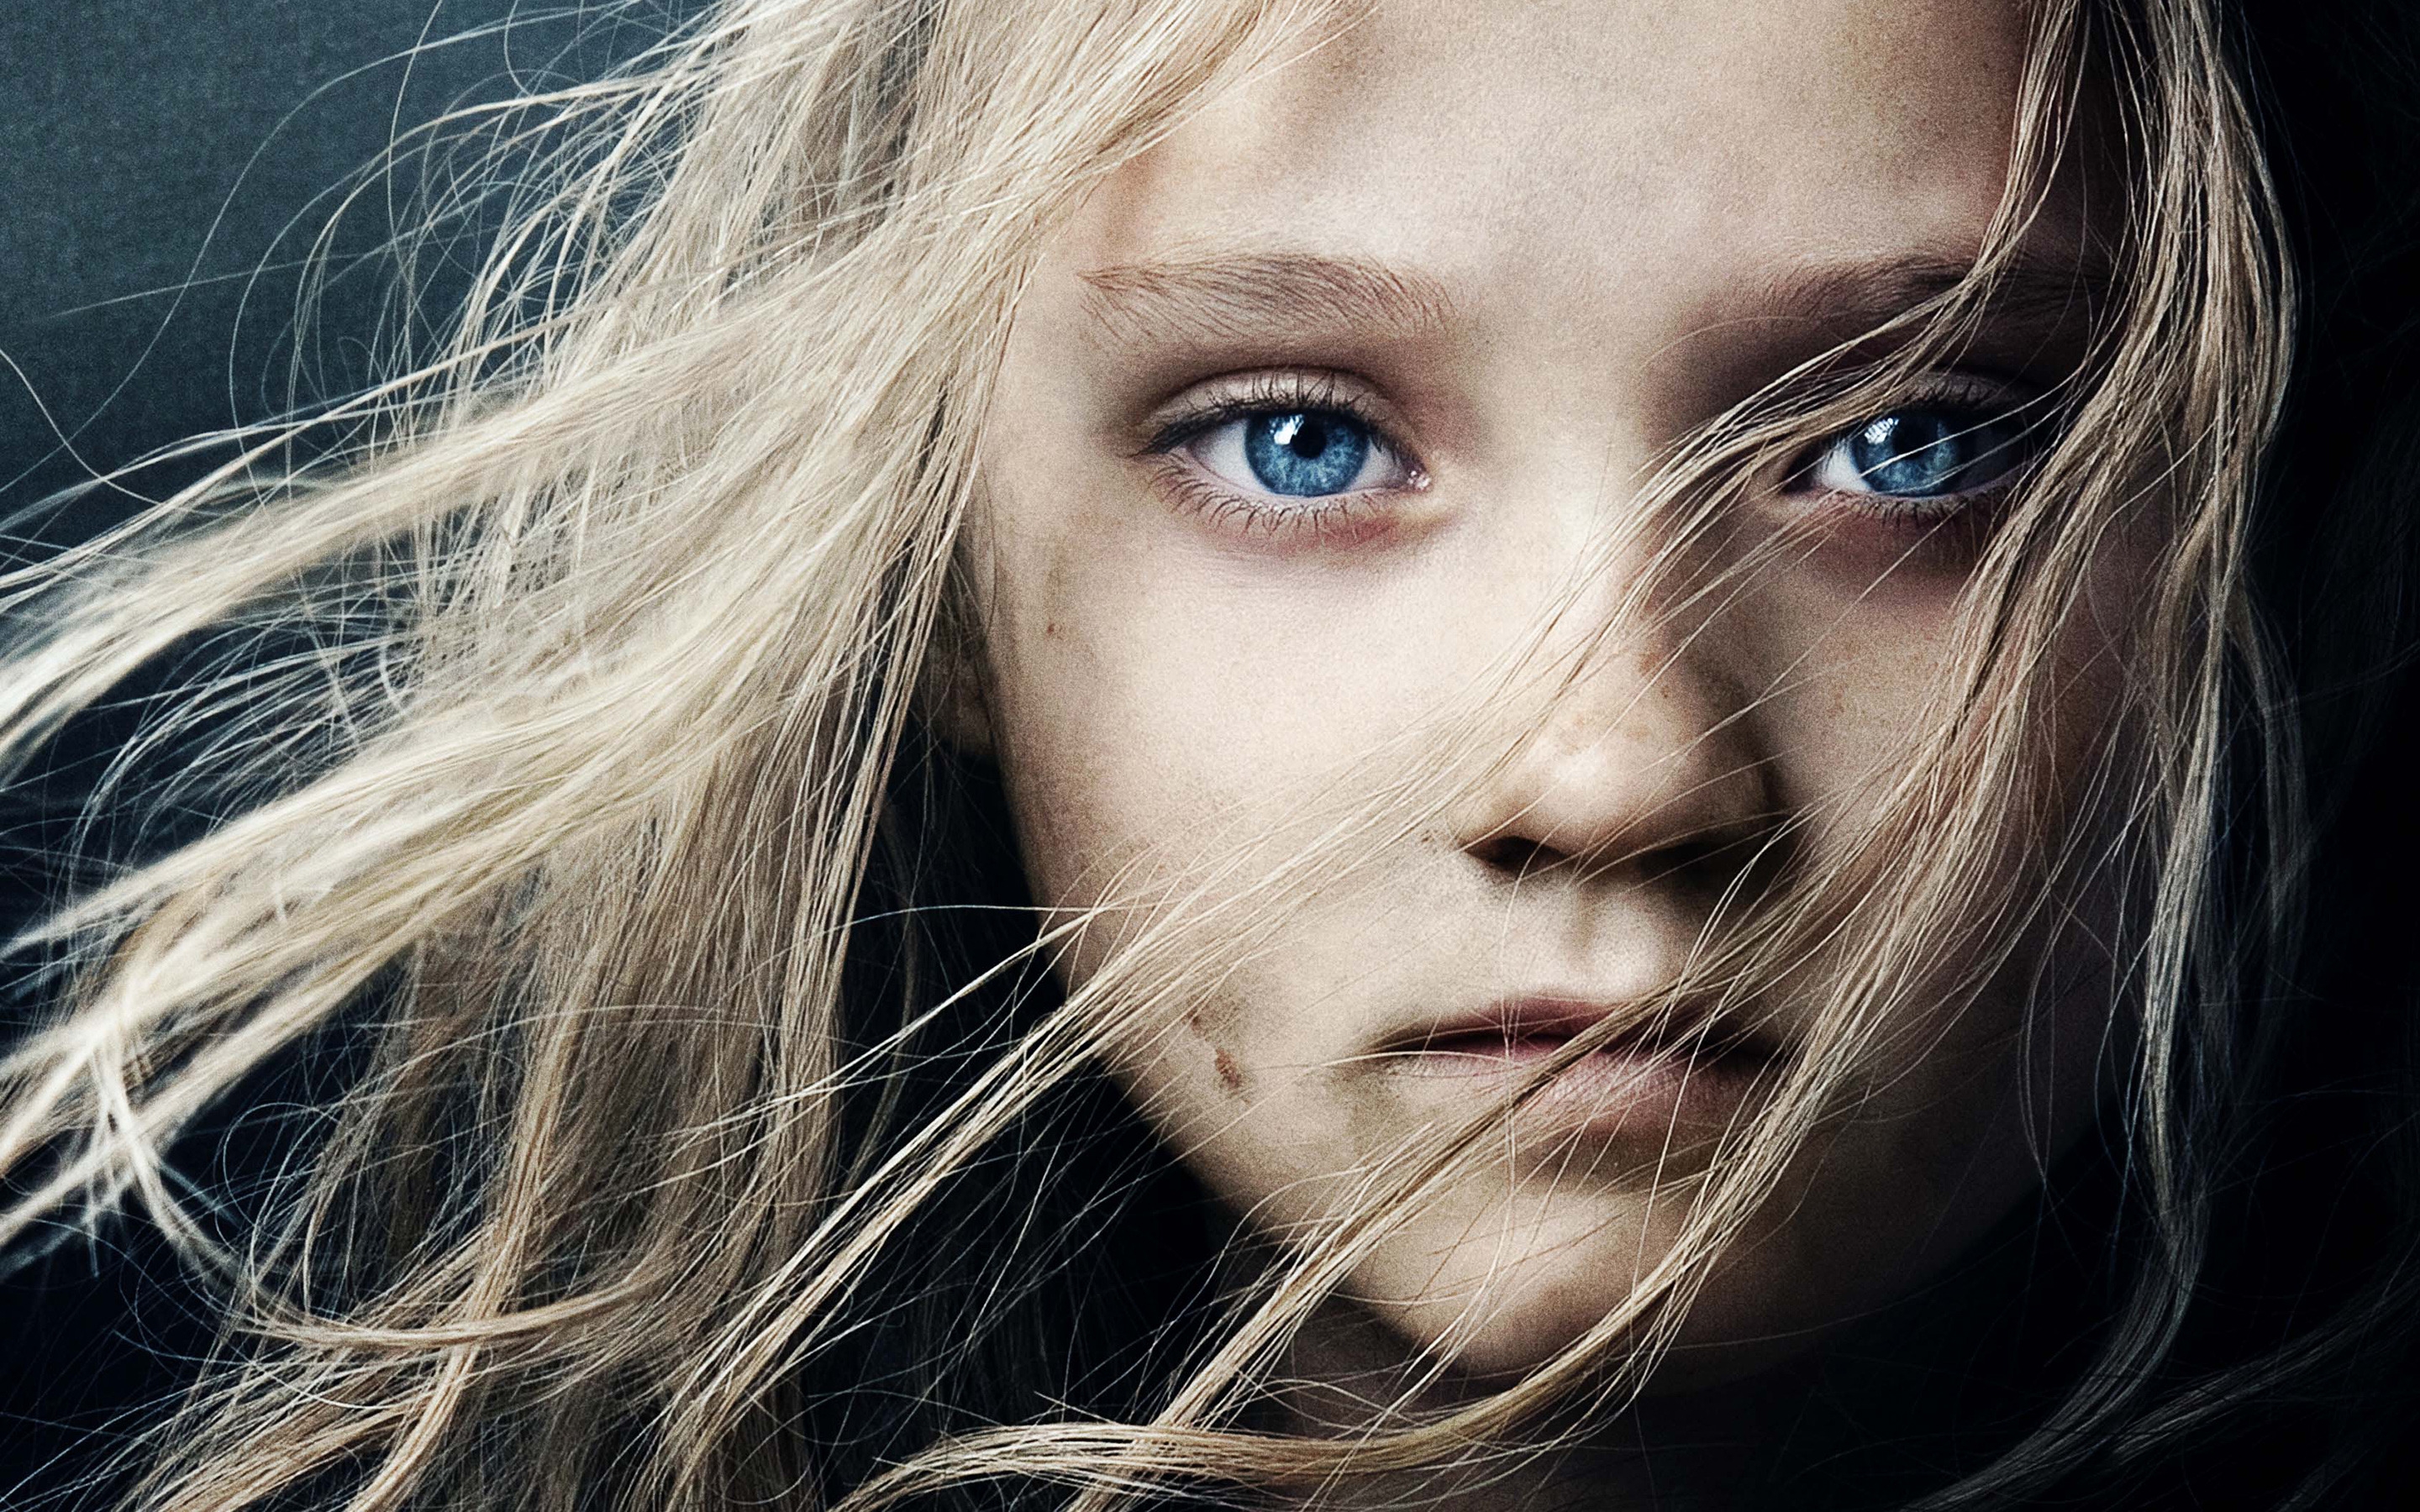 Les Miserables Movie 2012 for 2880 x 1800 Retina Display resolution